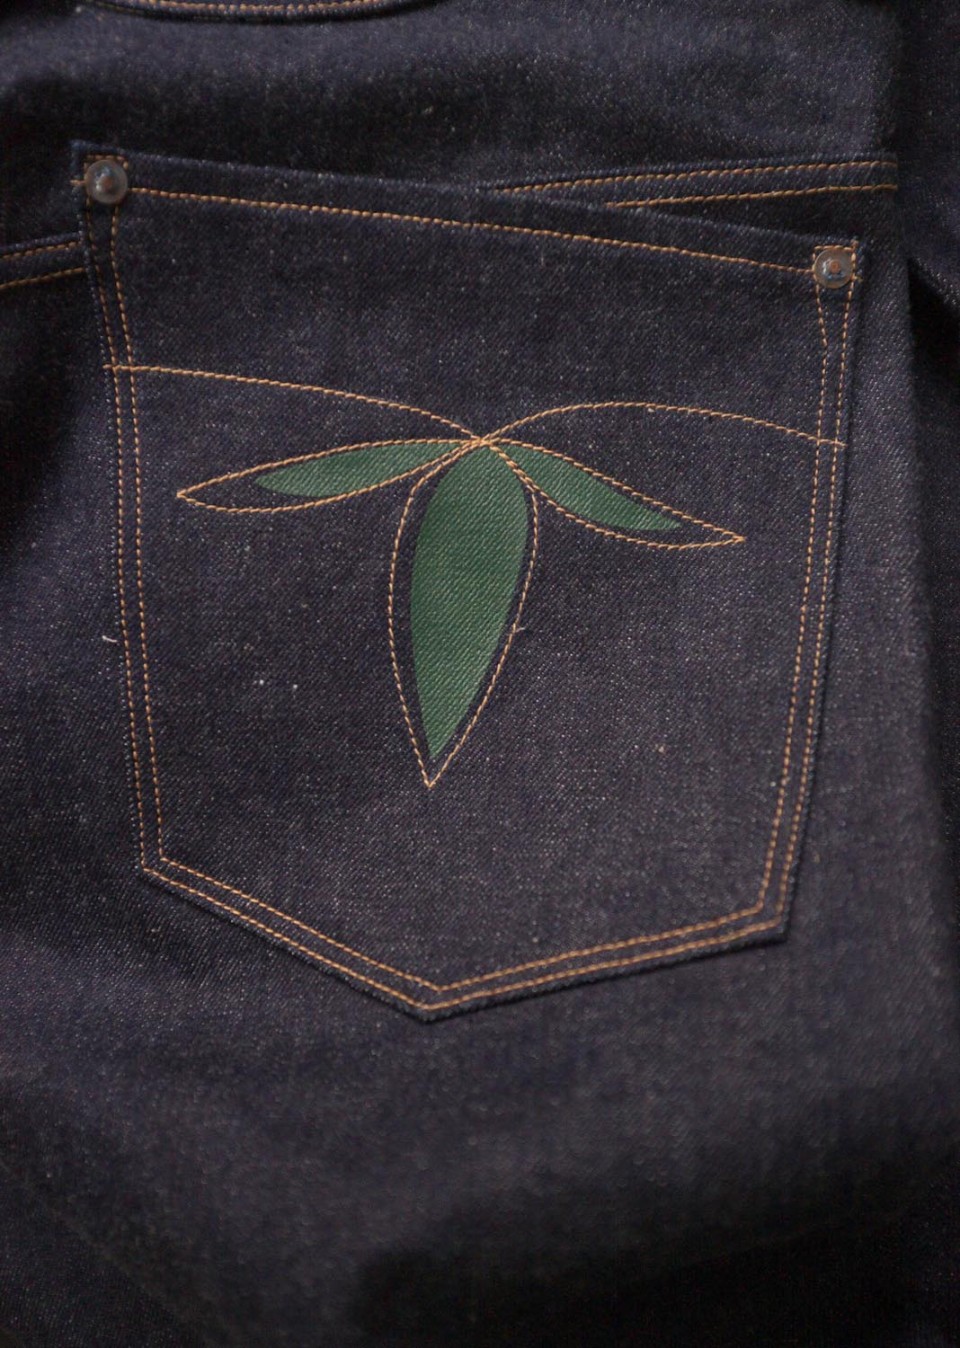 Stitched and painted arcuate on Brown-Duck & Digger Rough Rider Jeans